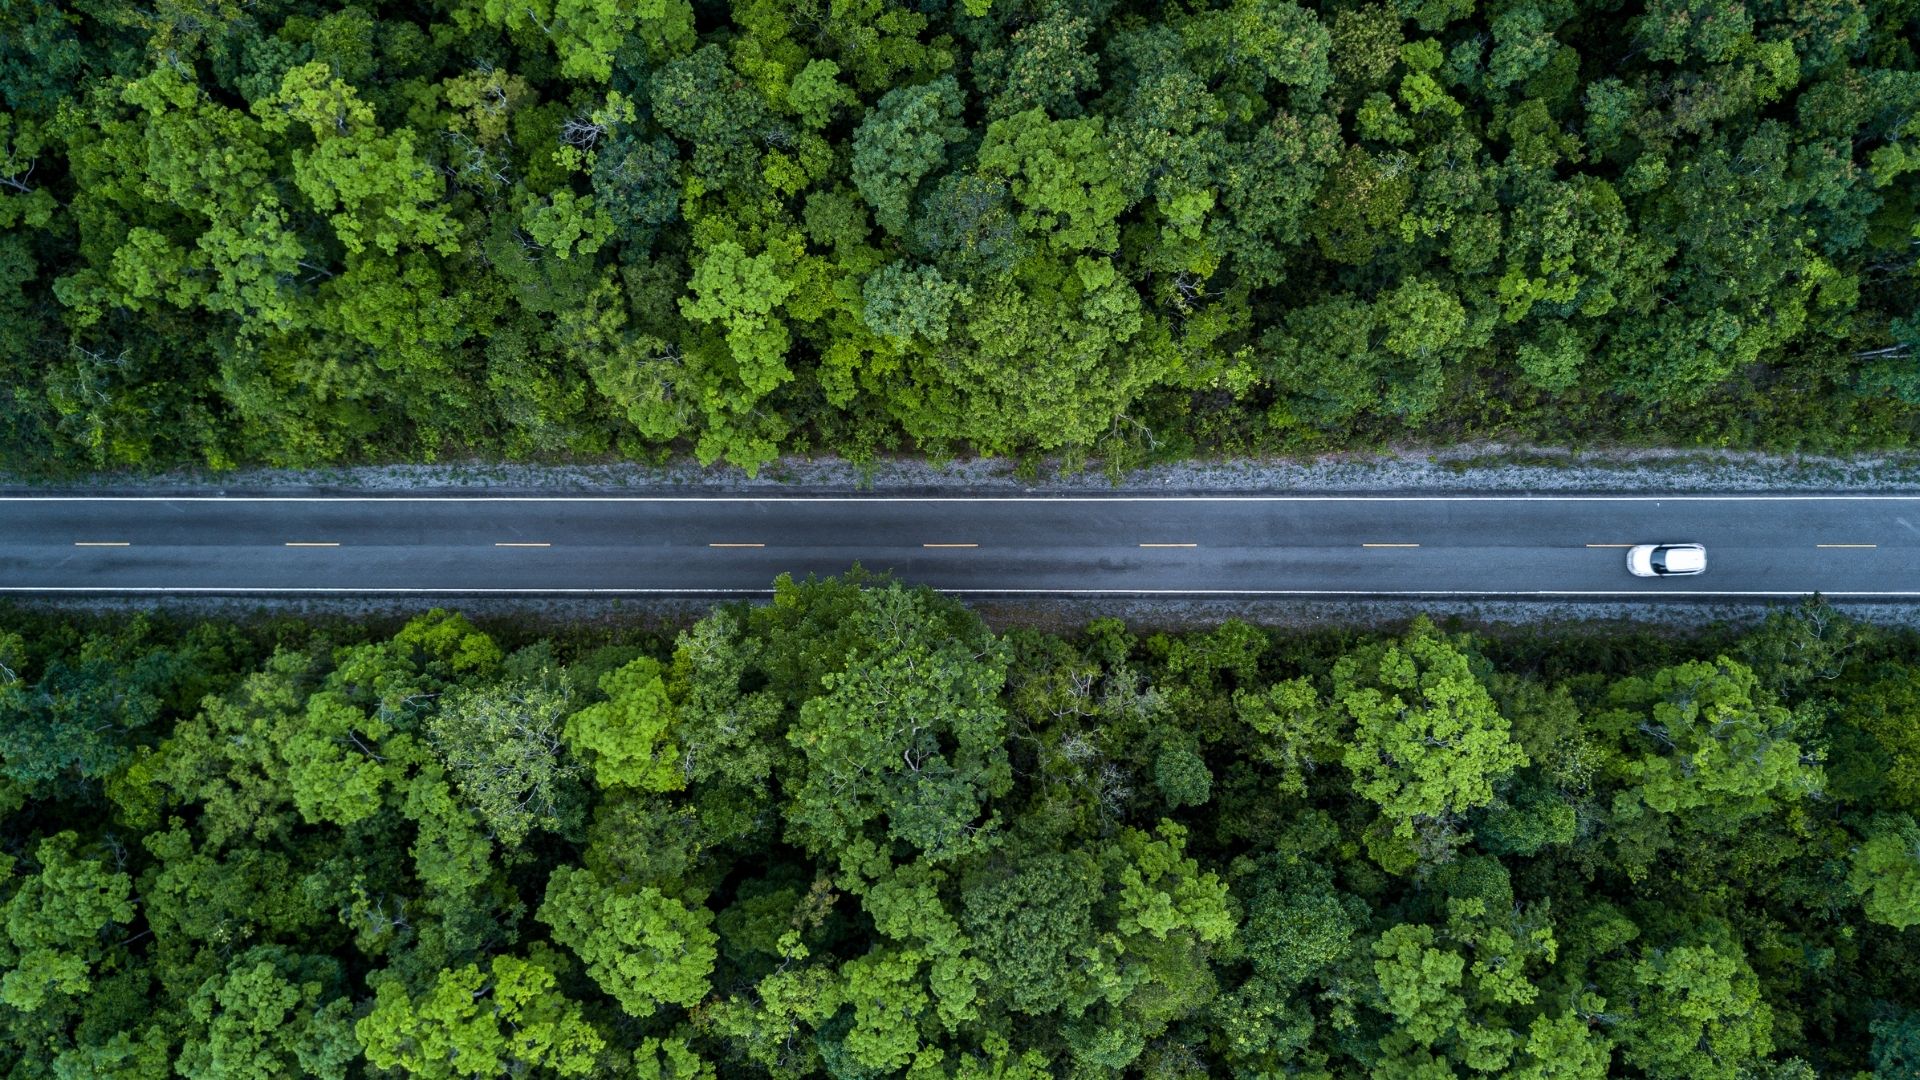 A road through a forest with a single car driving on it